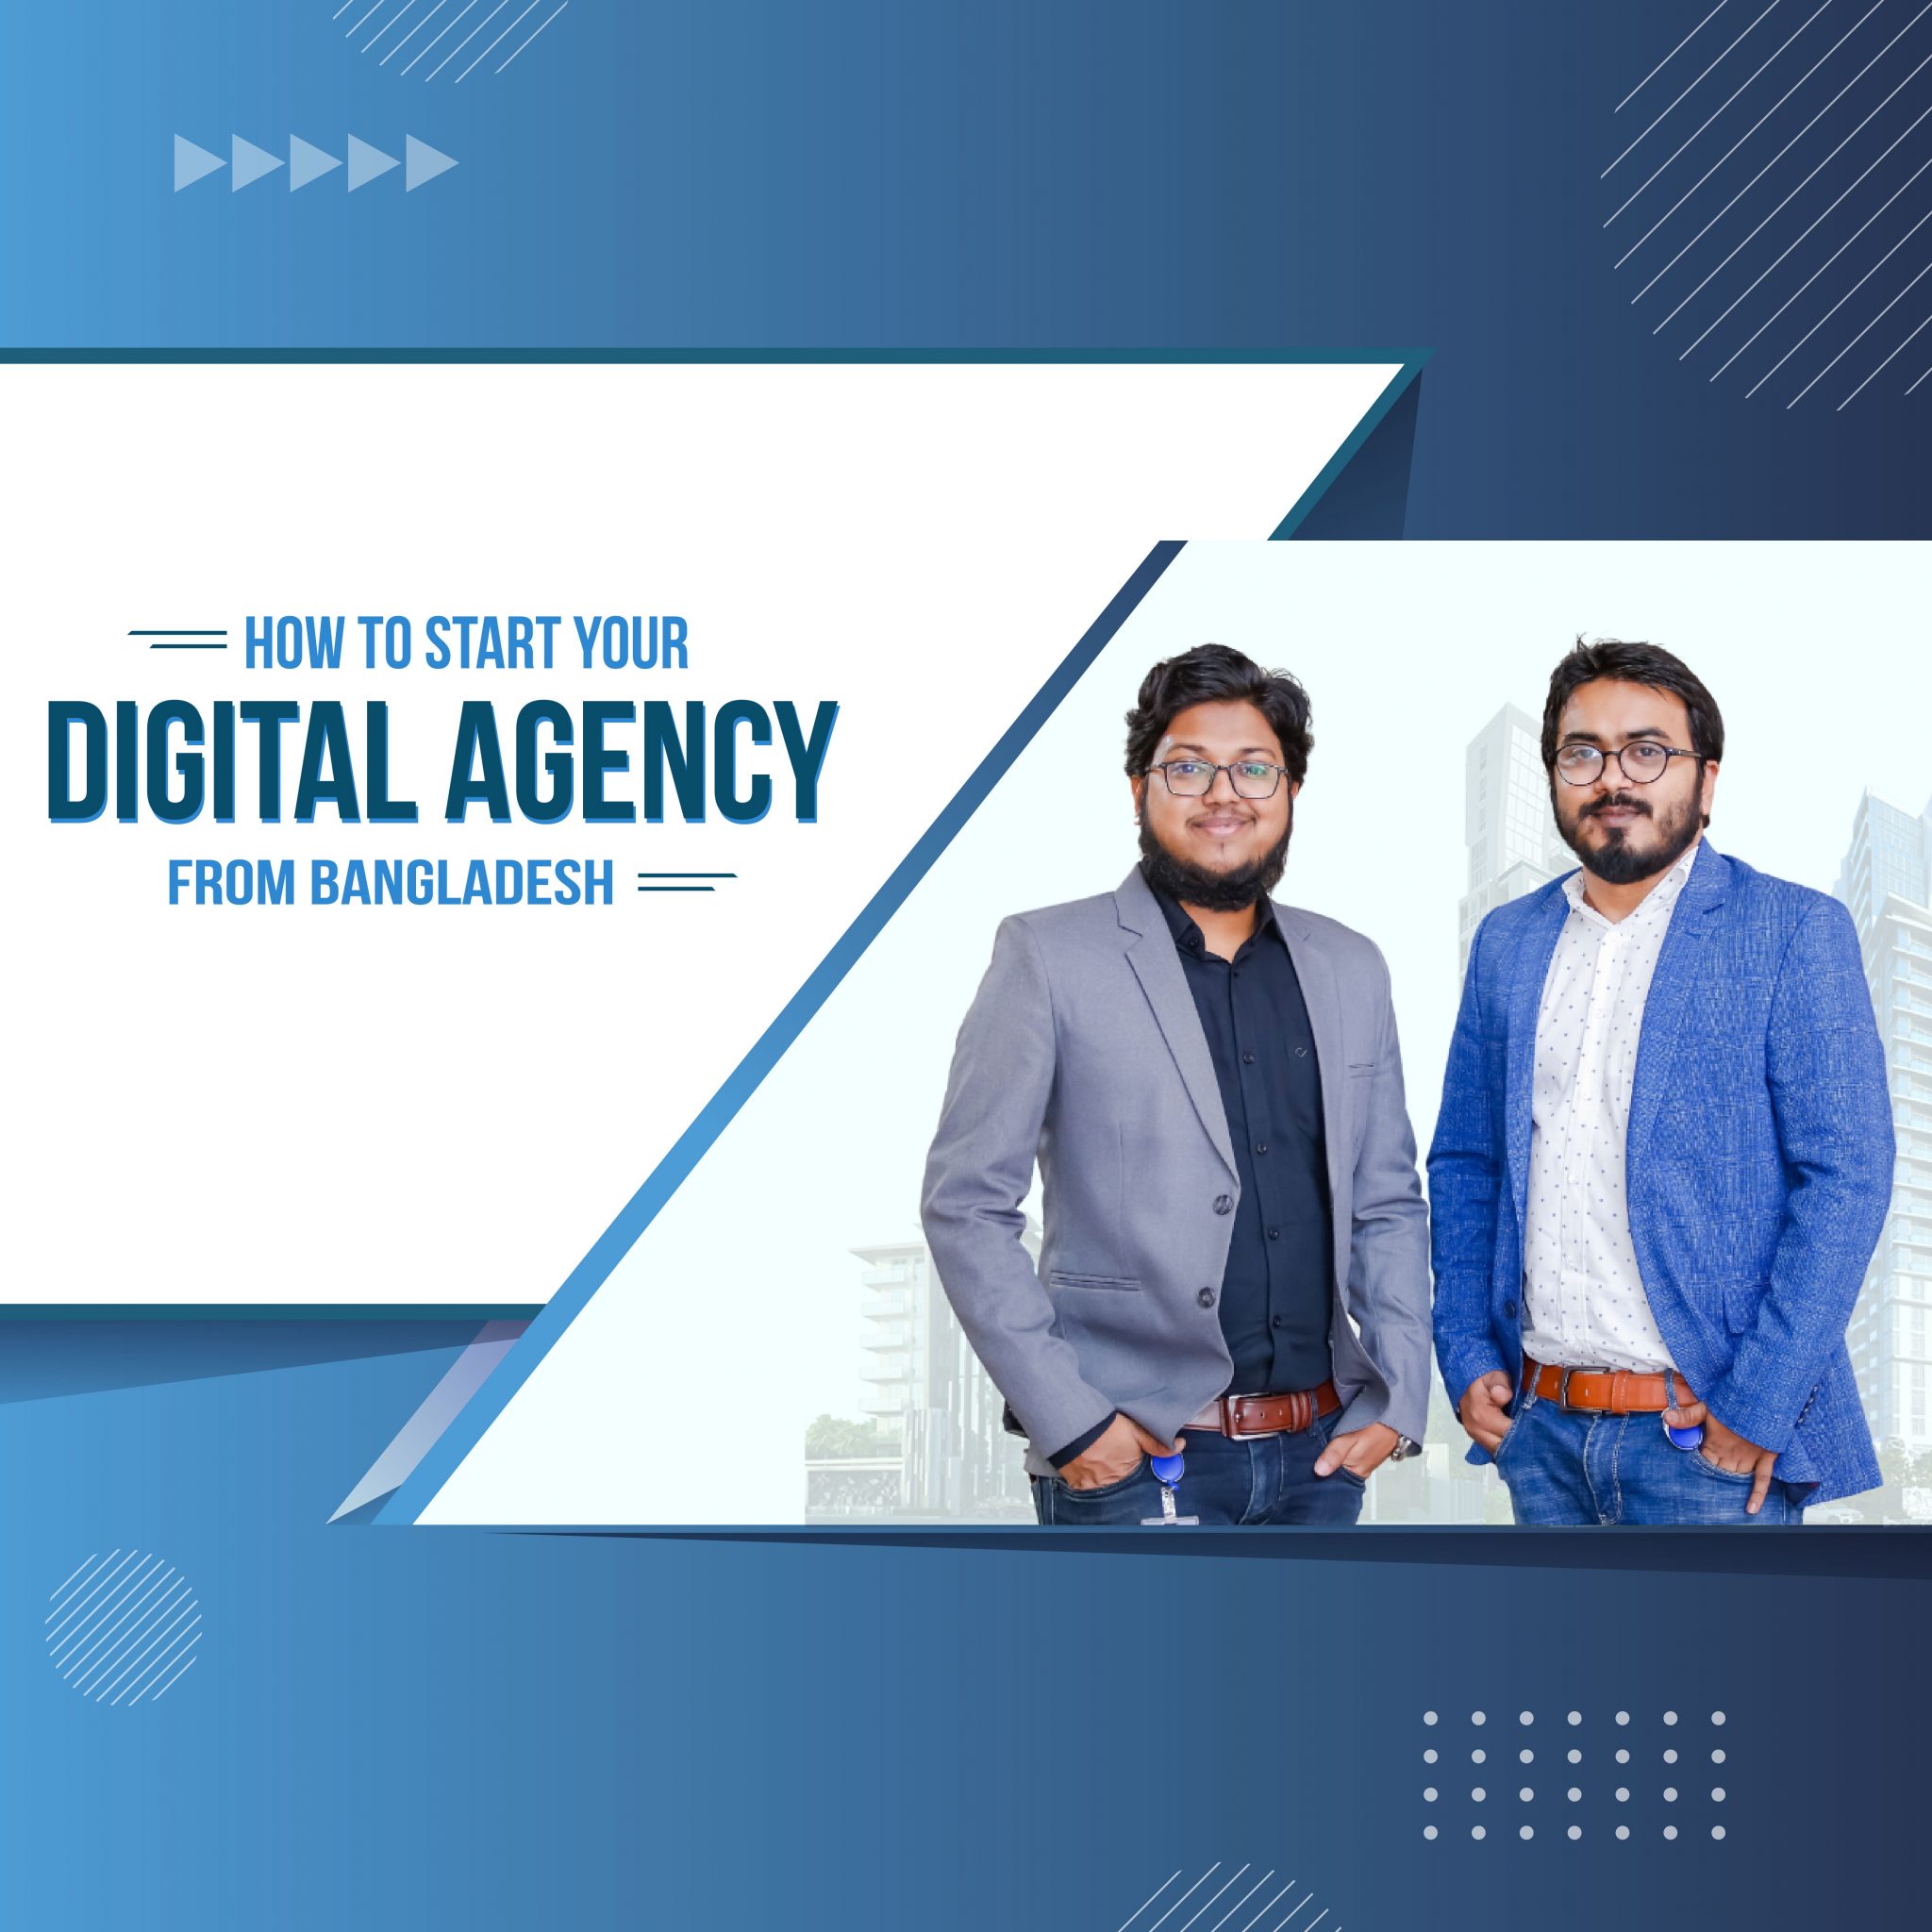 How to Start Digital Agency from Bangladesh